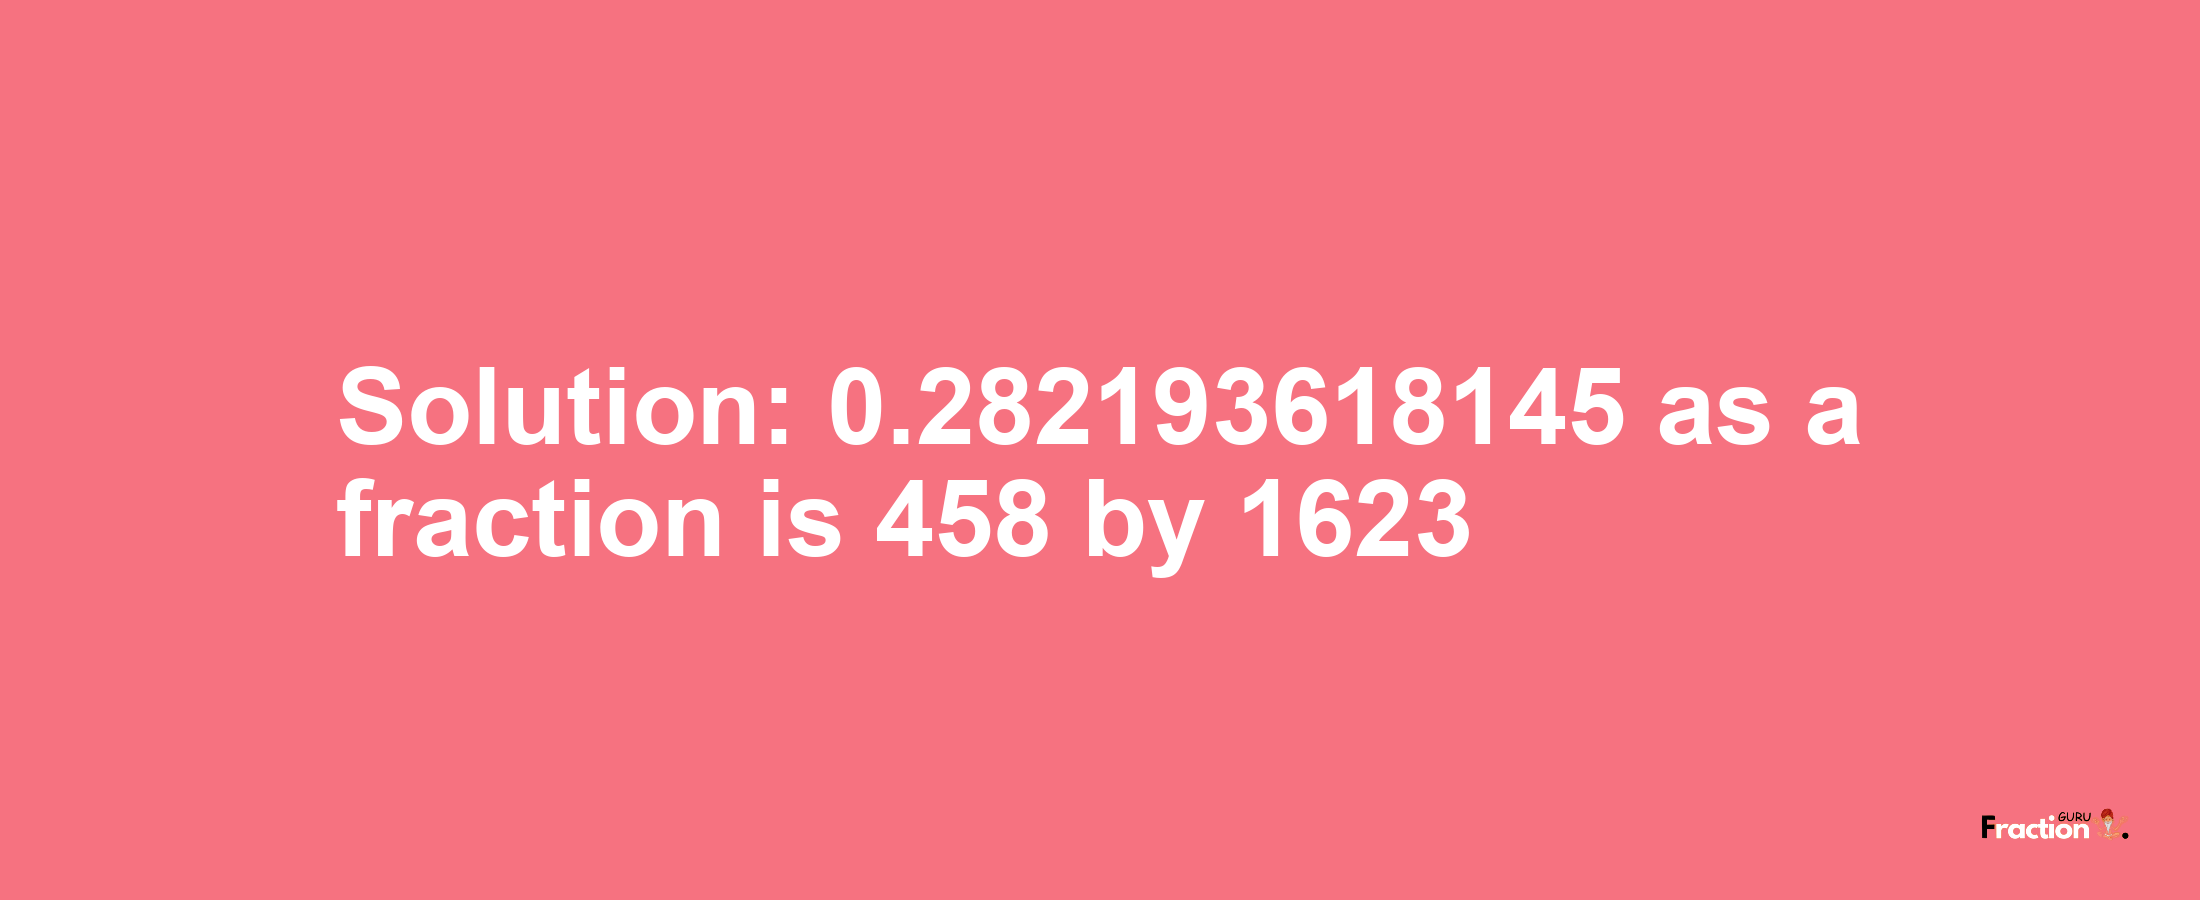 Solution:0.282193618145 as a fraction is 458/1623